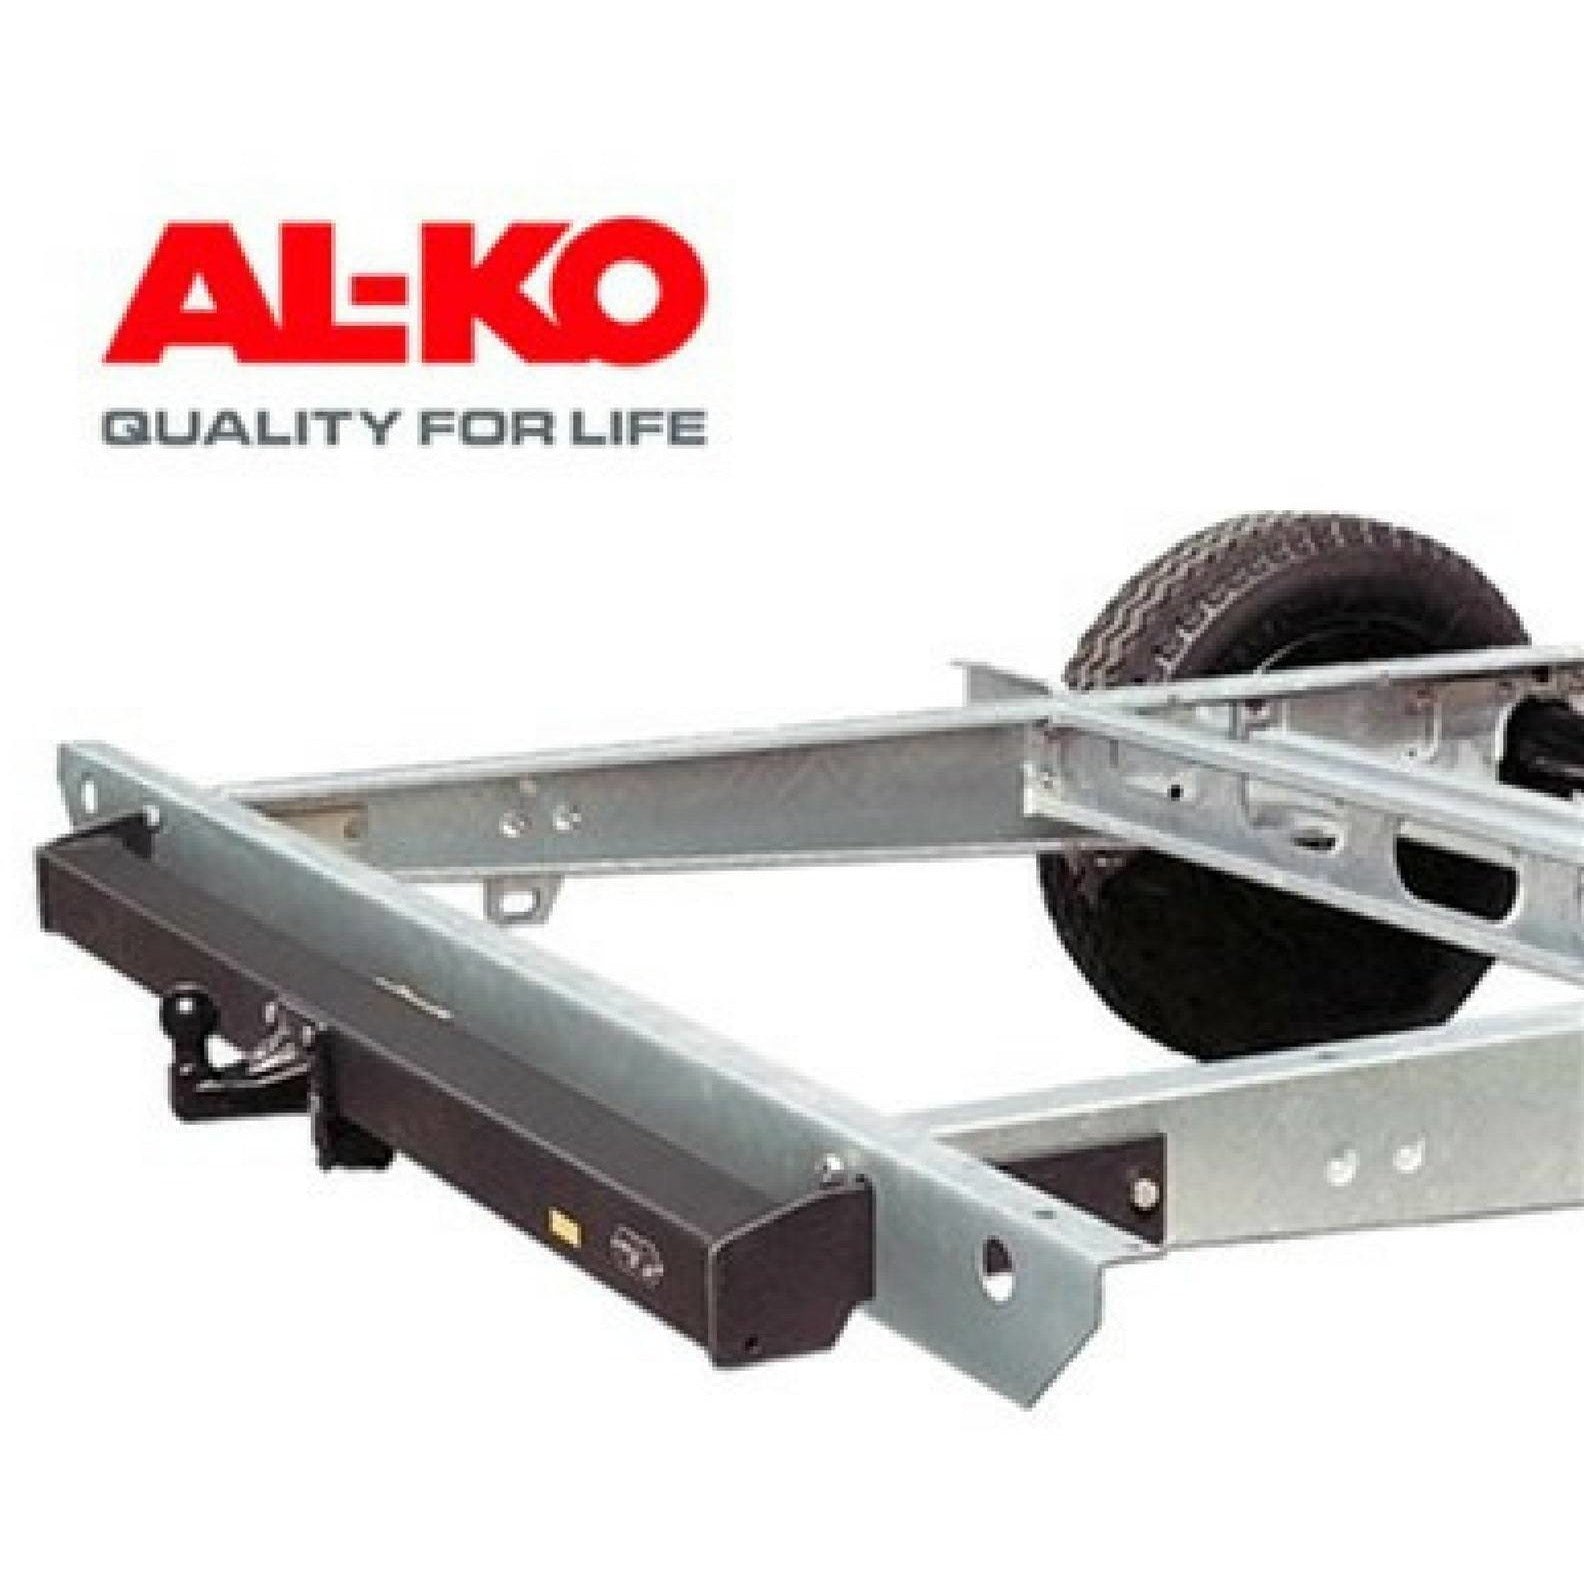 ALKO Towbar Assembly (1620355) made by ALKO. A Towing sold by Quality Caravan Awnings